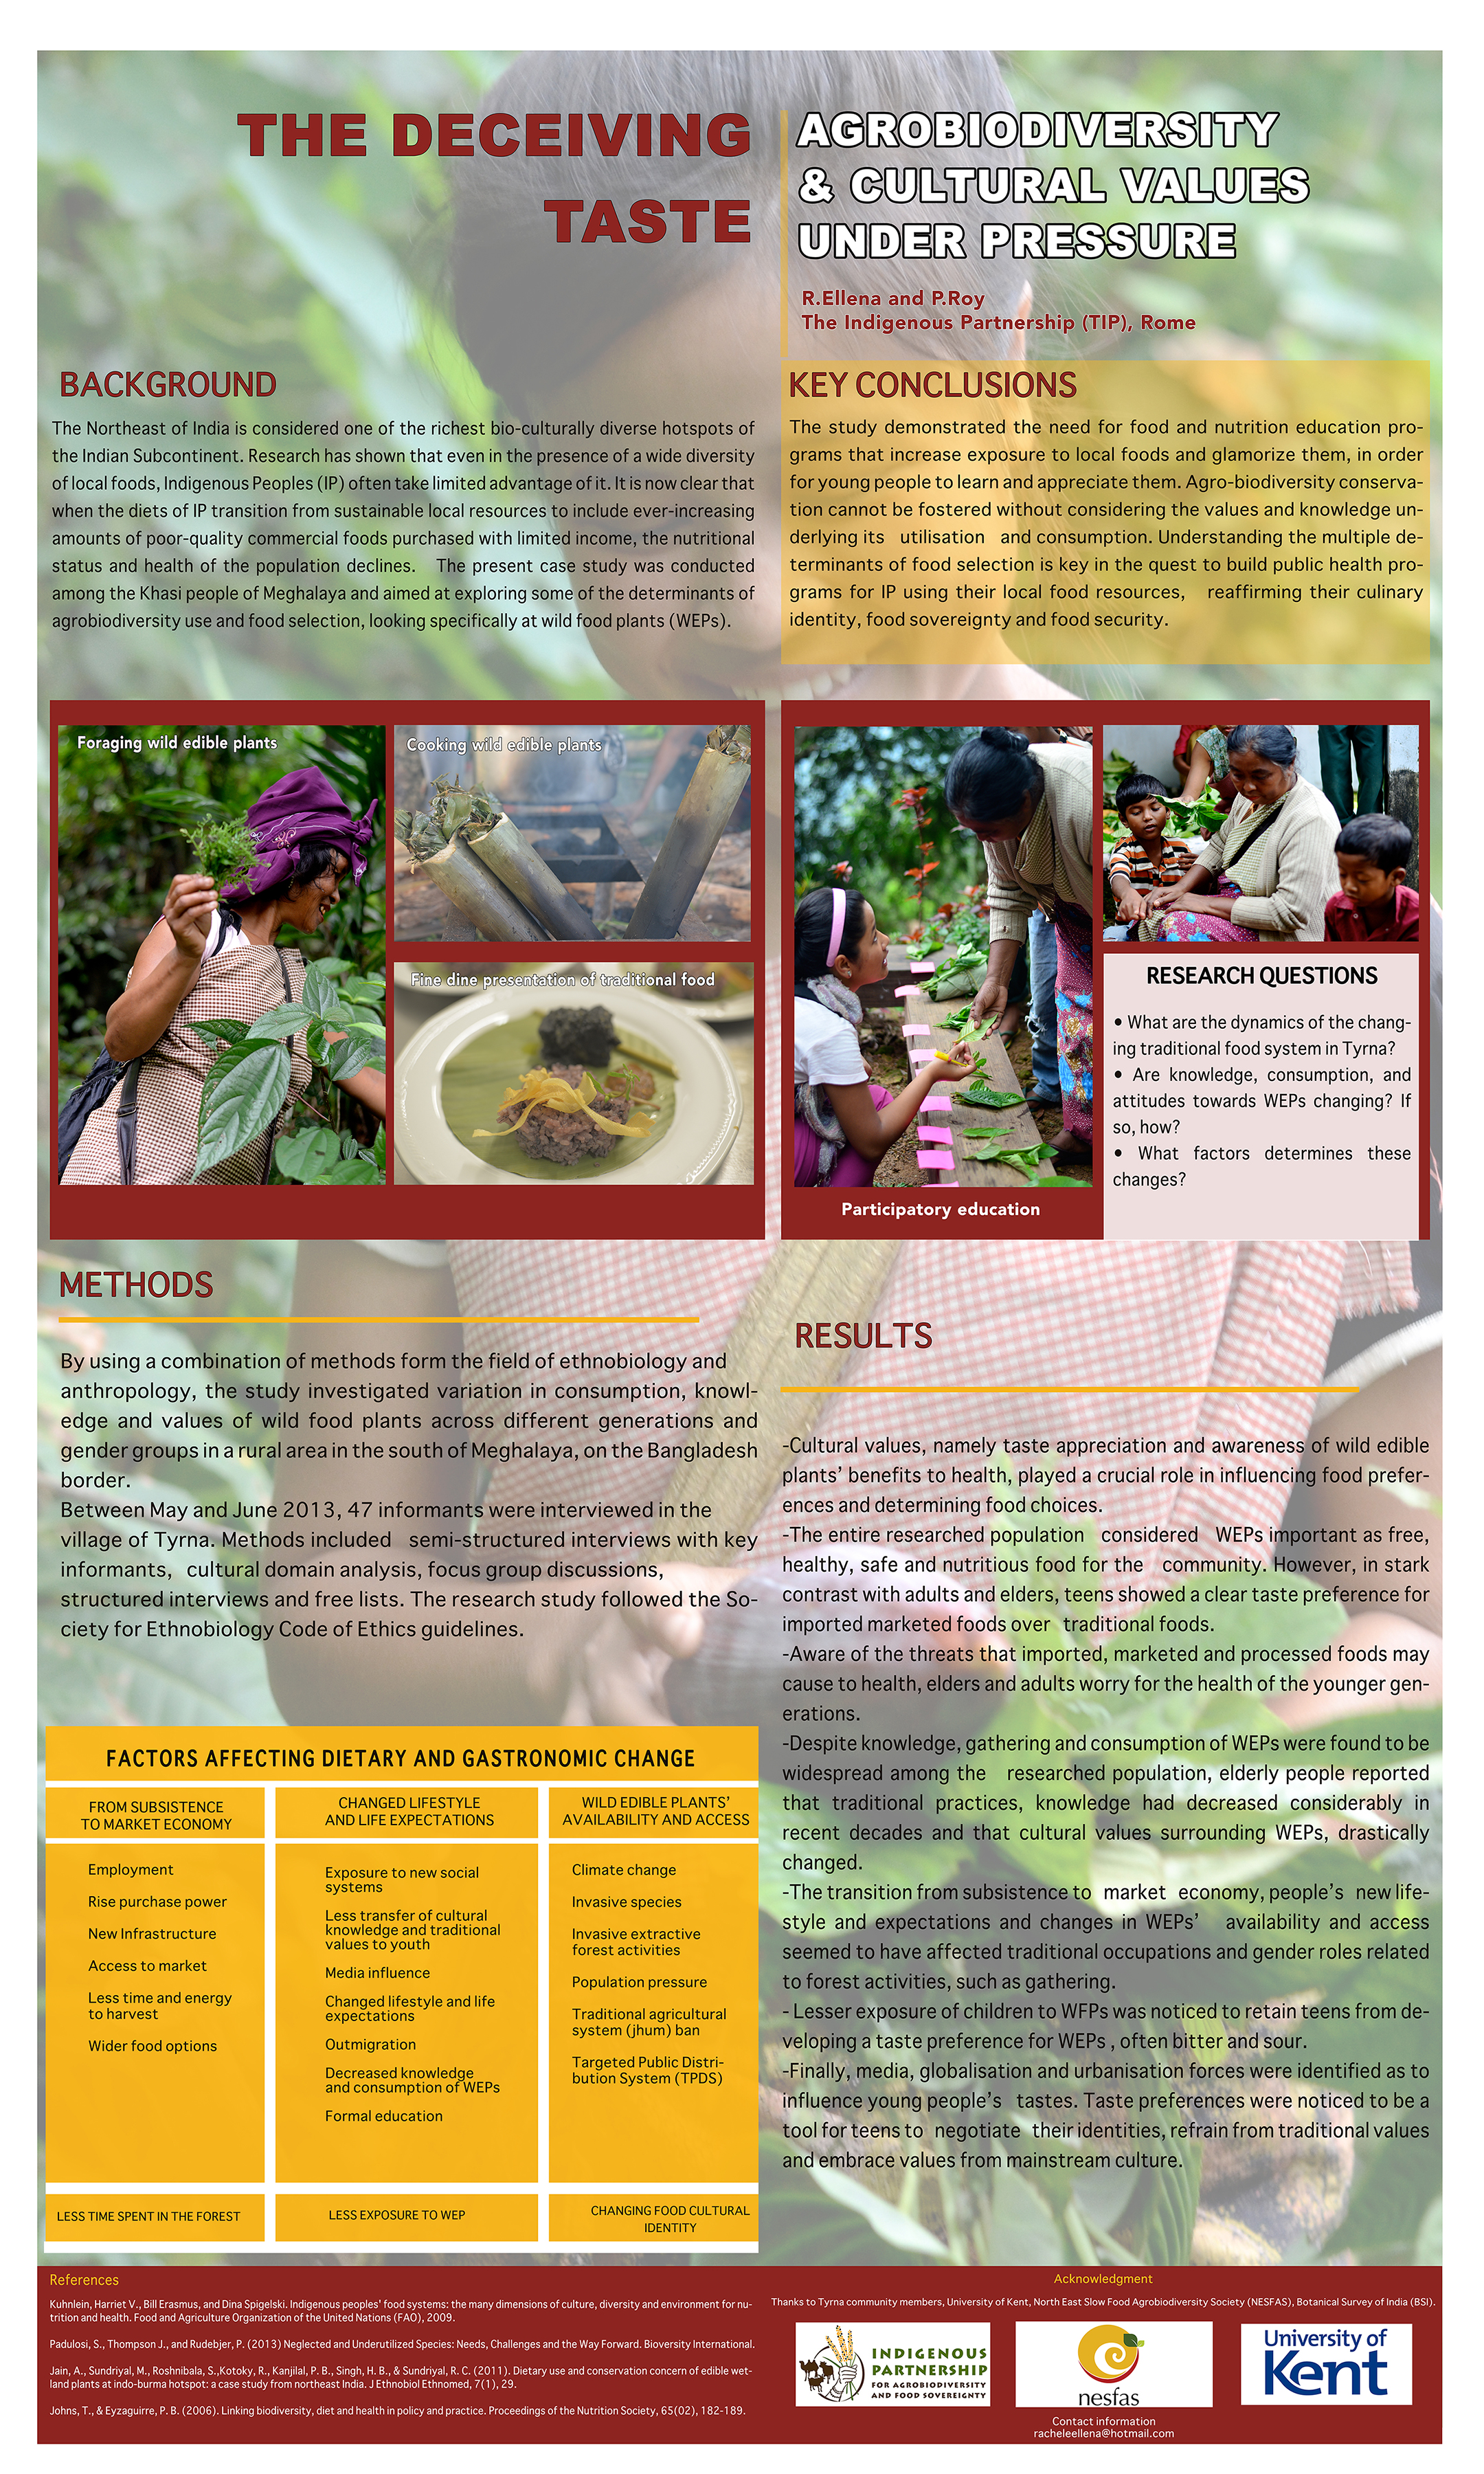  The poster highlighted “The Deceiving Taste: Agrobiodiversity and Cultural Values Under Pressure” a study done by Phrang Roy (Coordinator TIP, and R. Ellena, Reseach officer, TIP, Rome). 